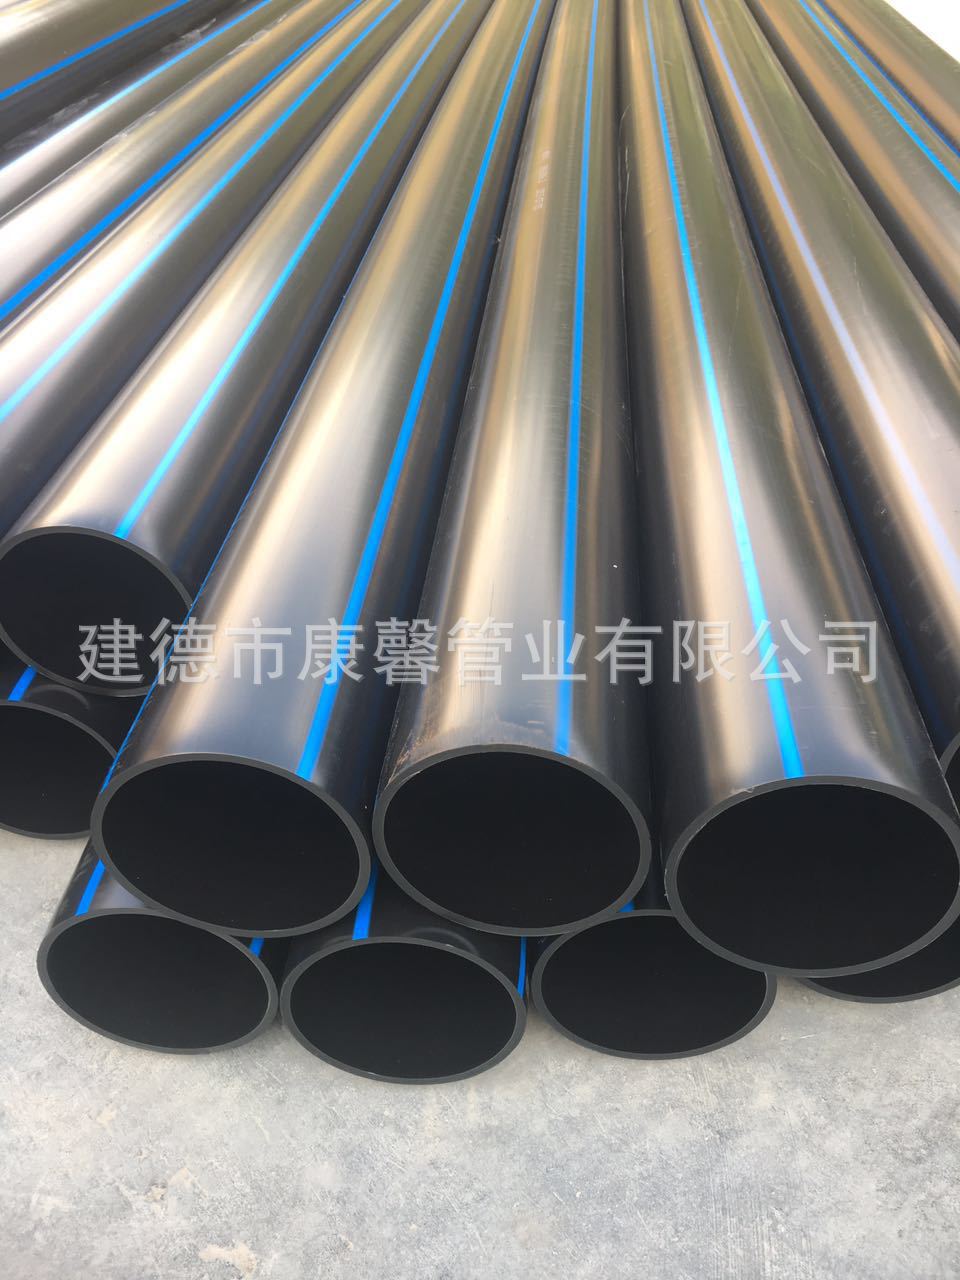 PE Pipe factory pe Threading tube DN250 Cable Wear line Management bushing hdpe wire